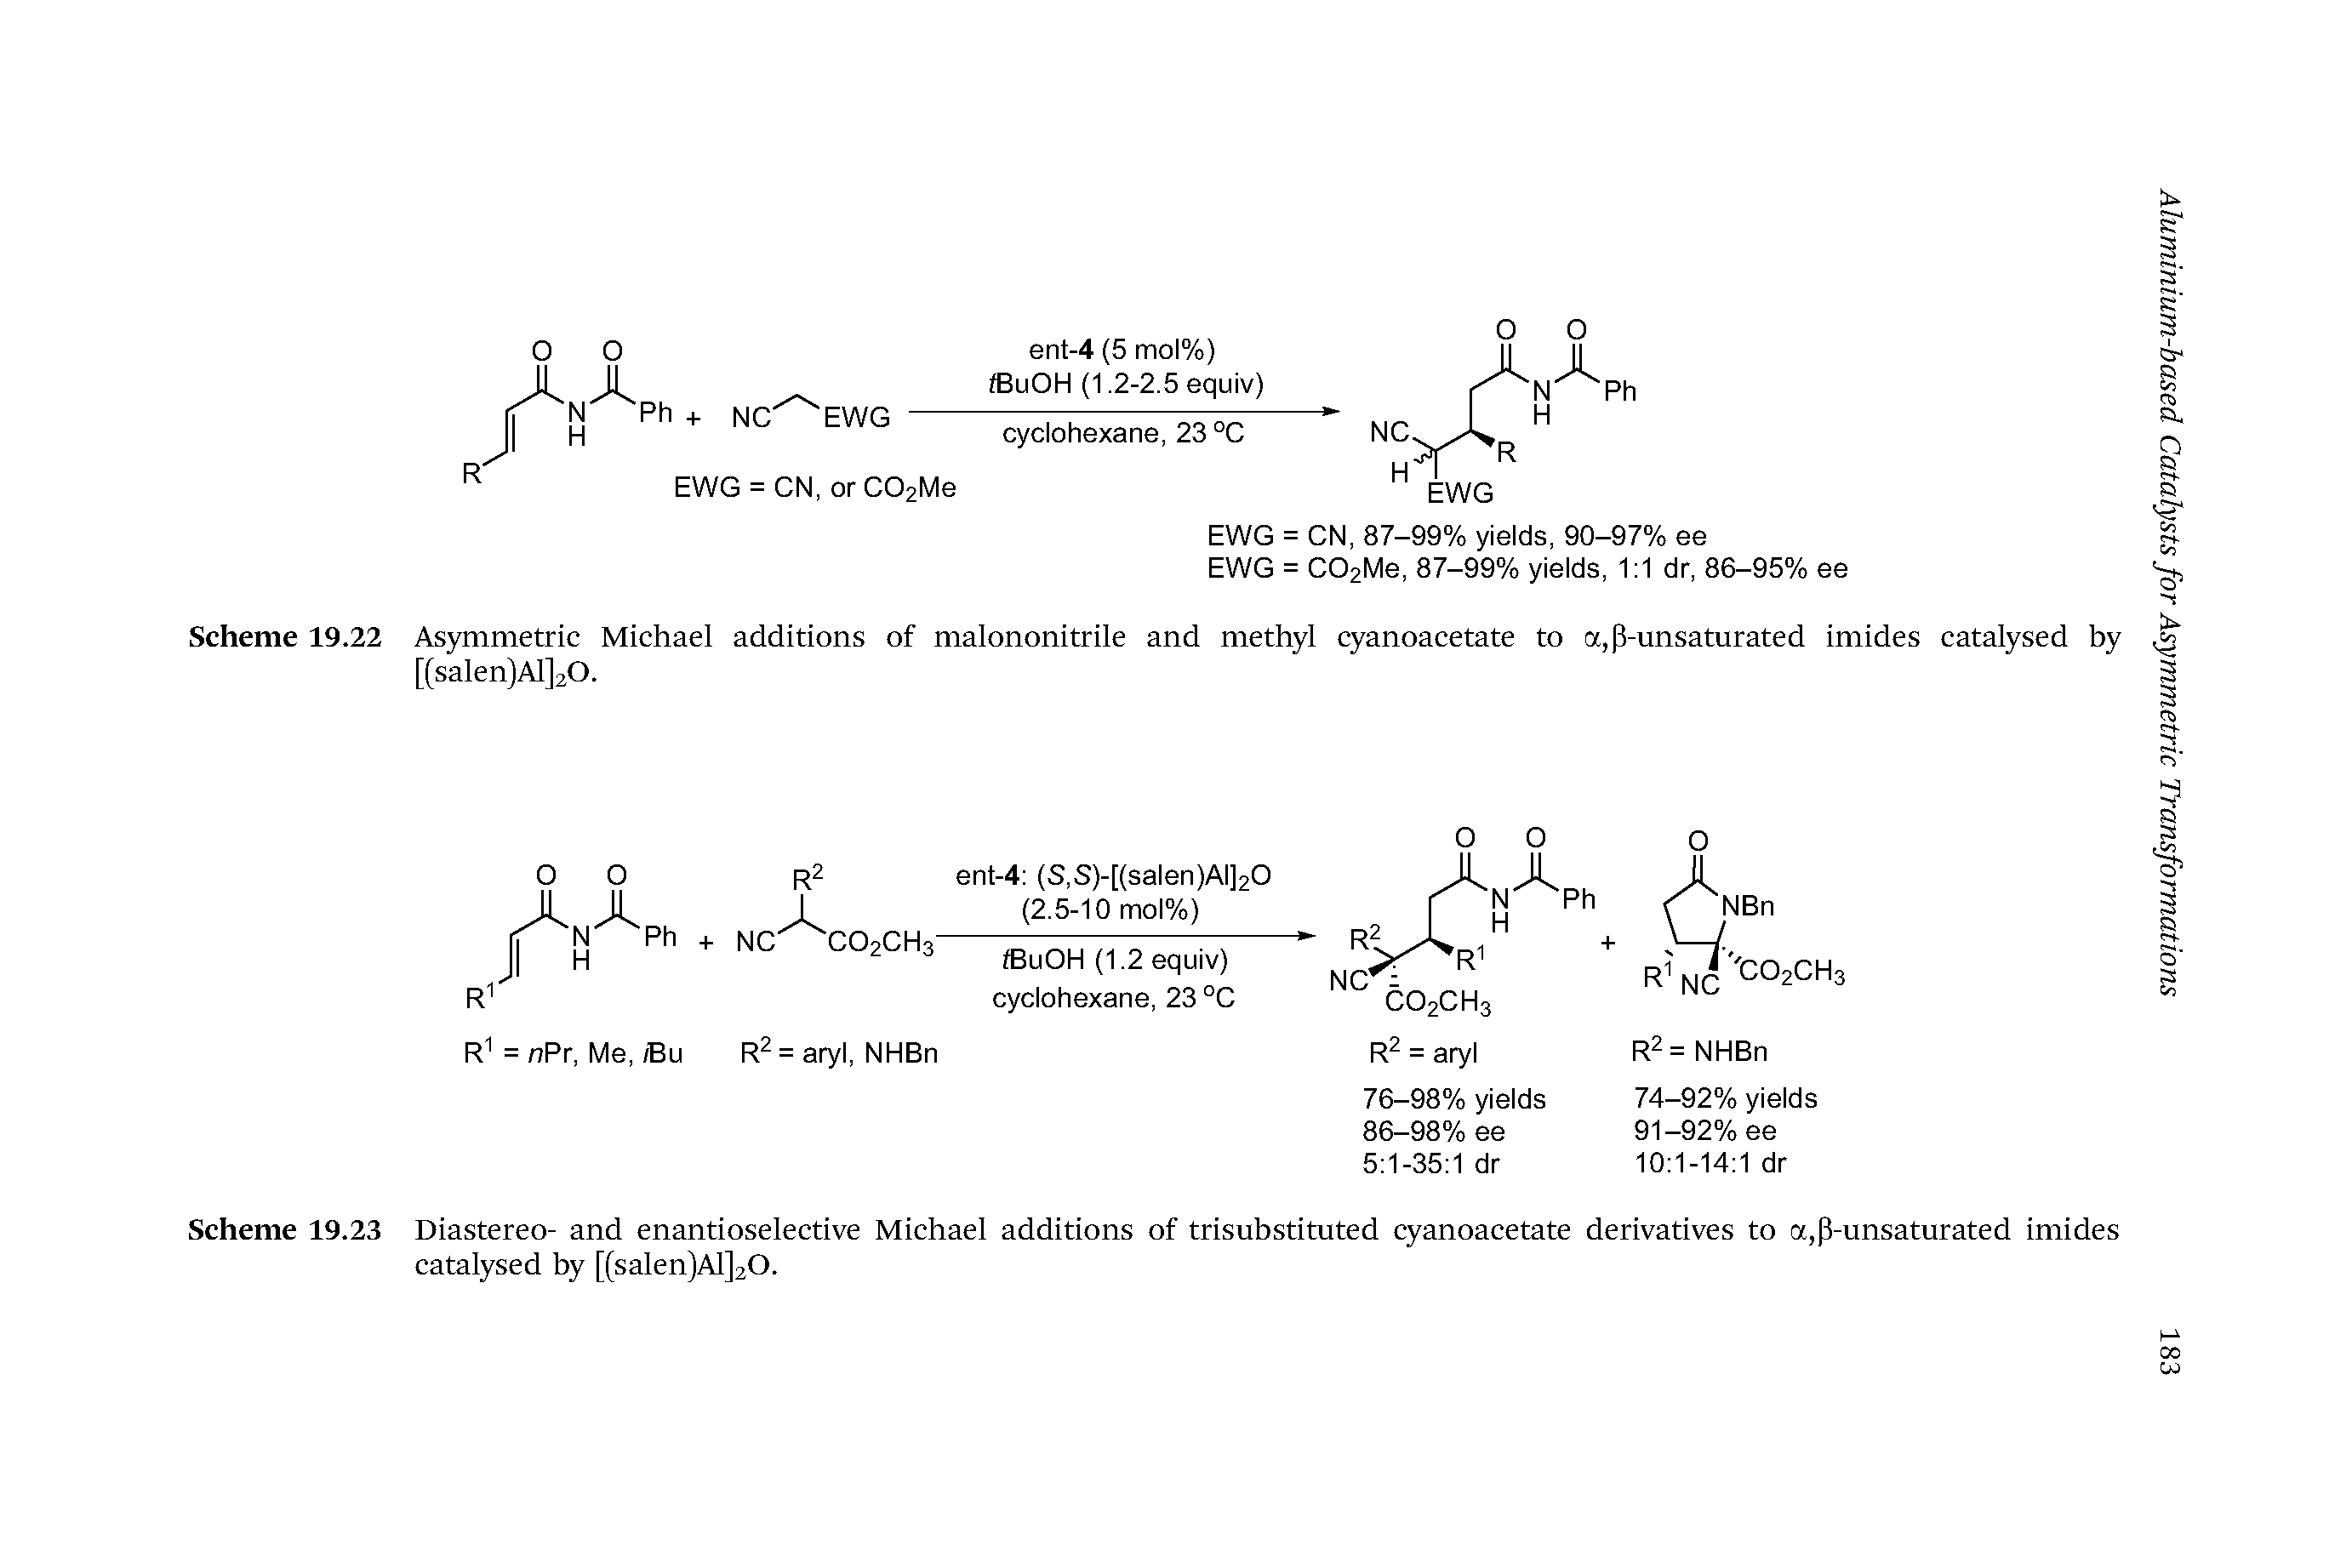 Scheme 19.22 Asymmetric Michael additions of malononitrile and methyl cyanoacetate to a,p-unsaturated imides catalysed by [(salen)Al]20.